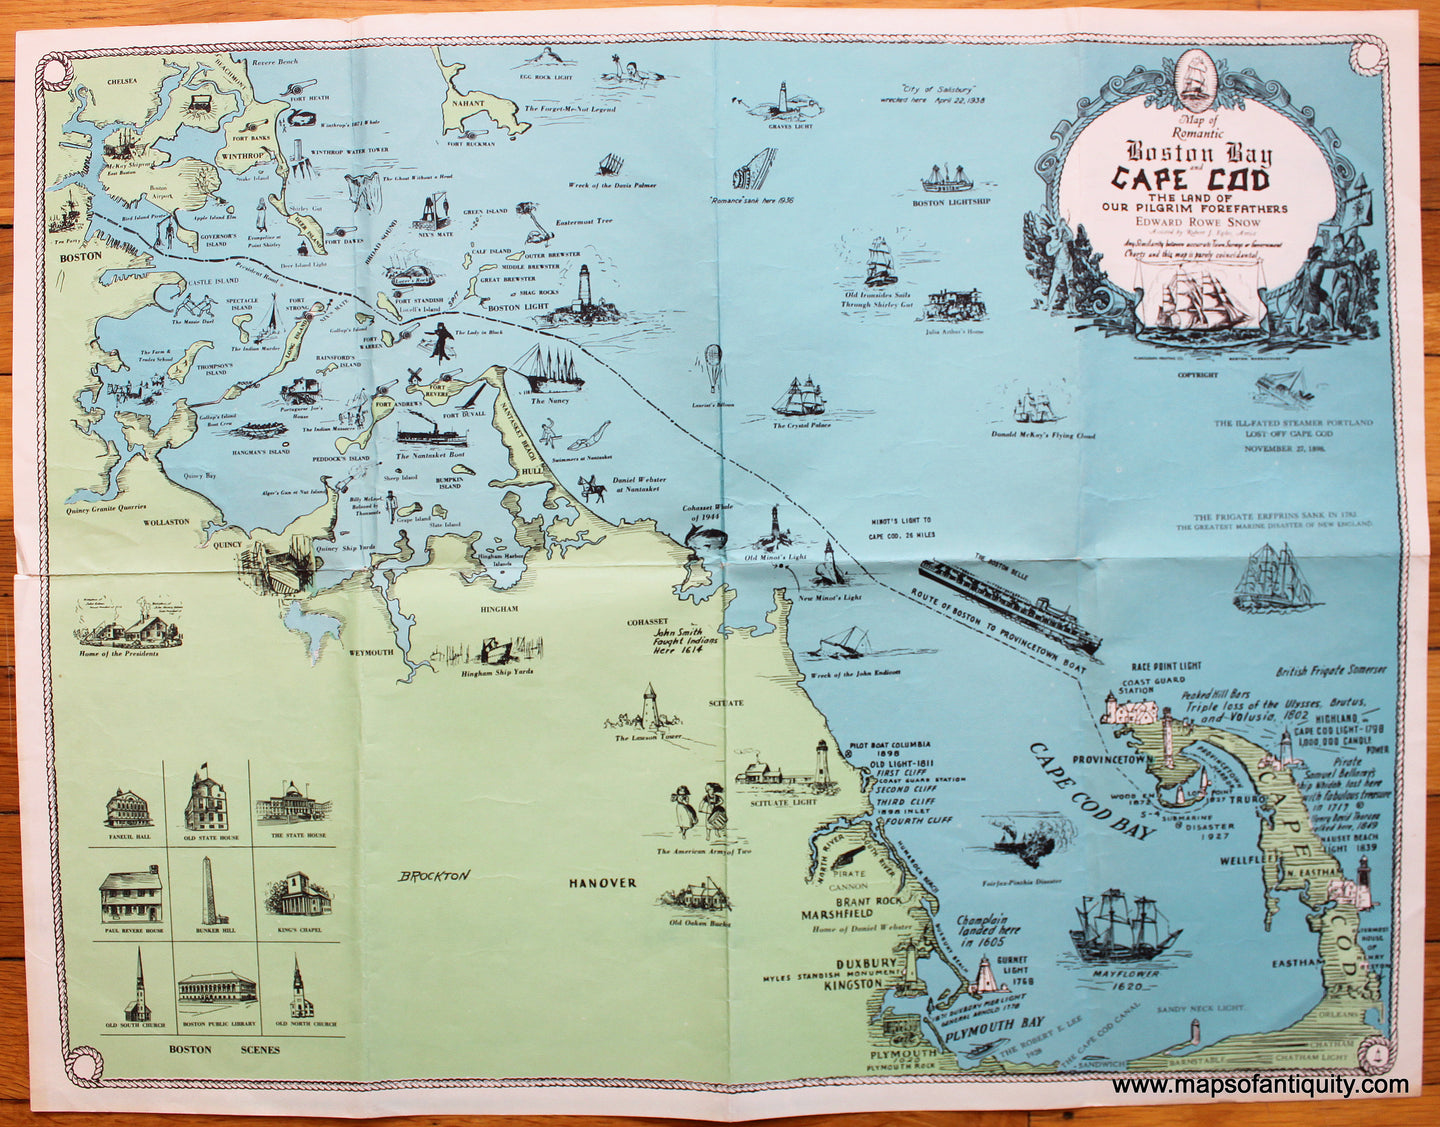 Antique-Map-Pictorial-Map-of-Romantic-Boston-Bay-and-Cape-Cod-the-Land-of-our-Pilgrim-Forefathers-c.-1938?-Charles-OwensMaps-of-Antiquity